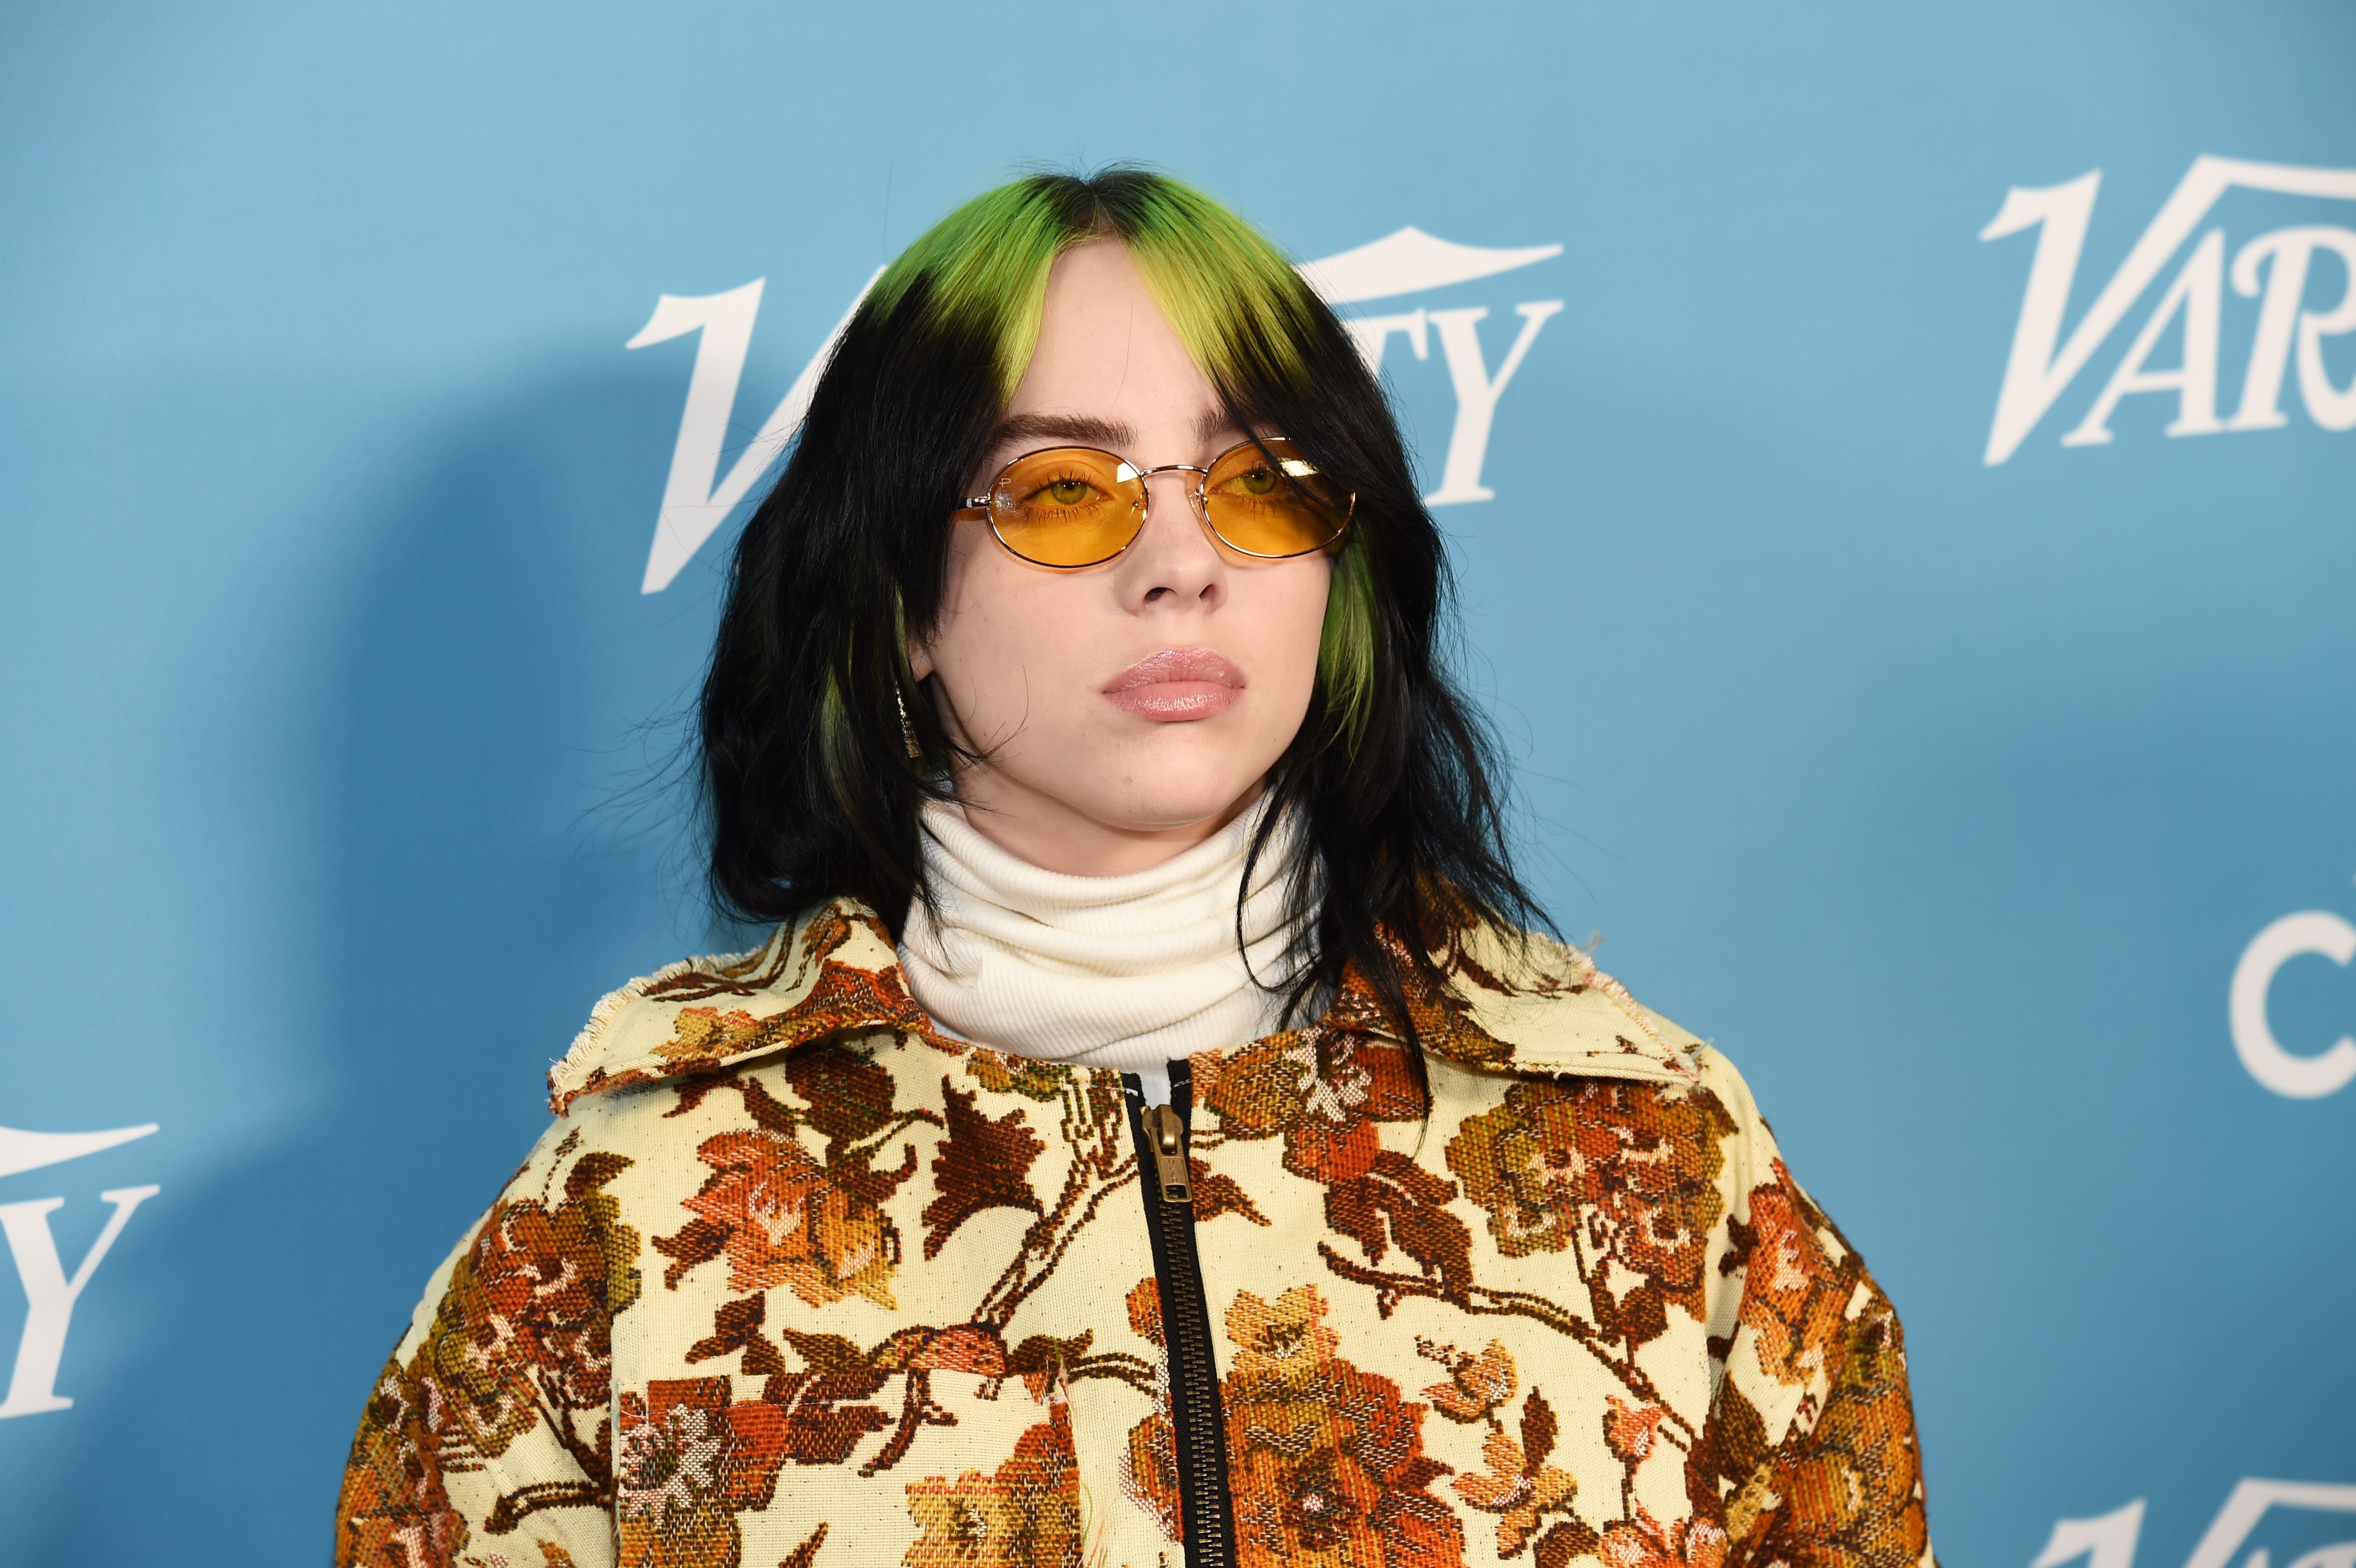 Billie Eilish Feels Her Reasons For Wearing Baggy Clothes Gets Miscommunicated Sometimes